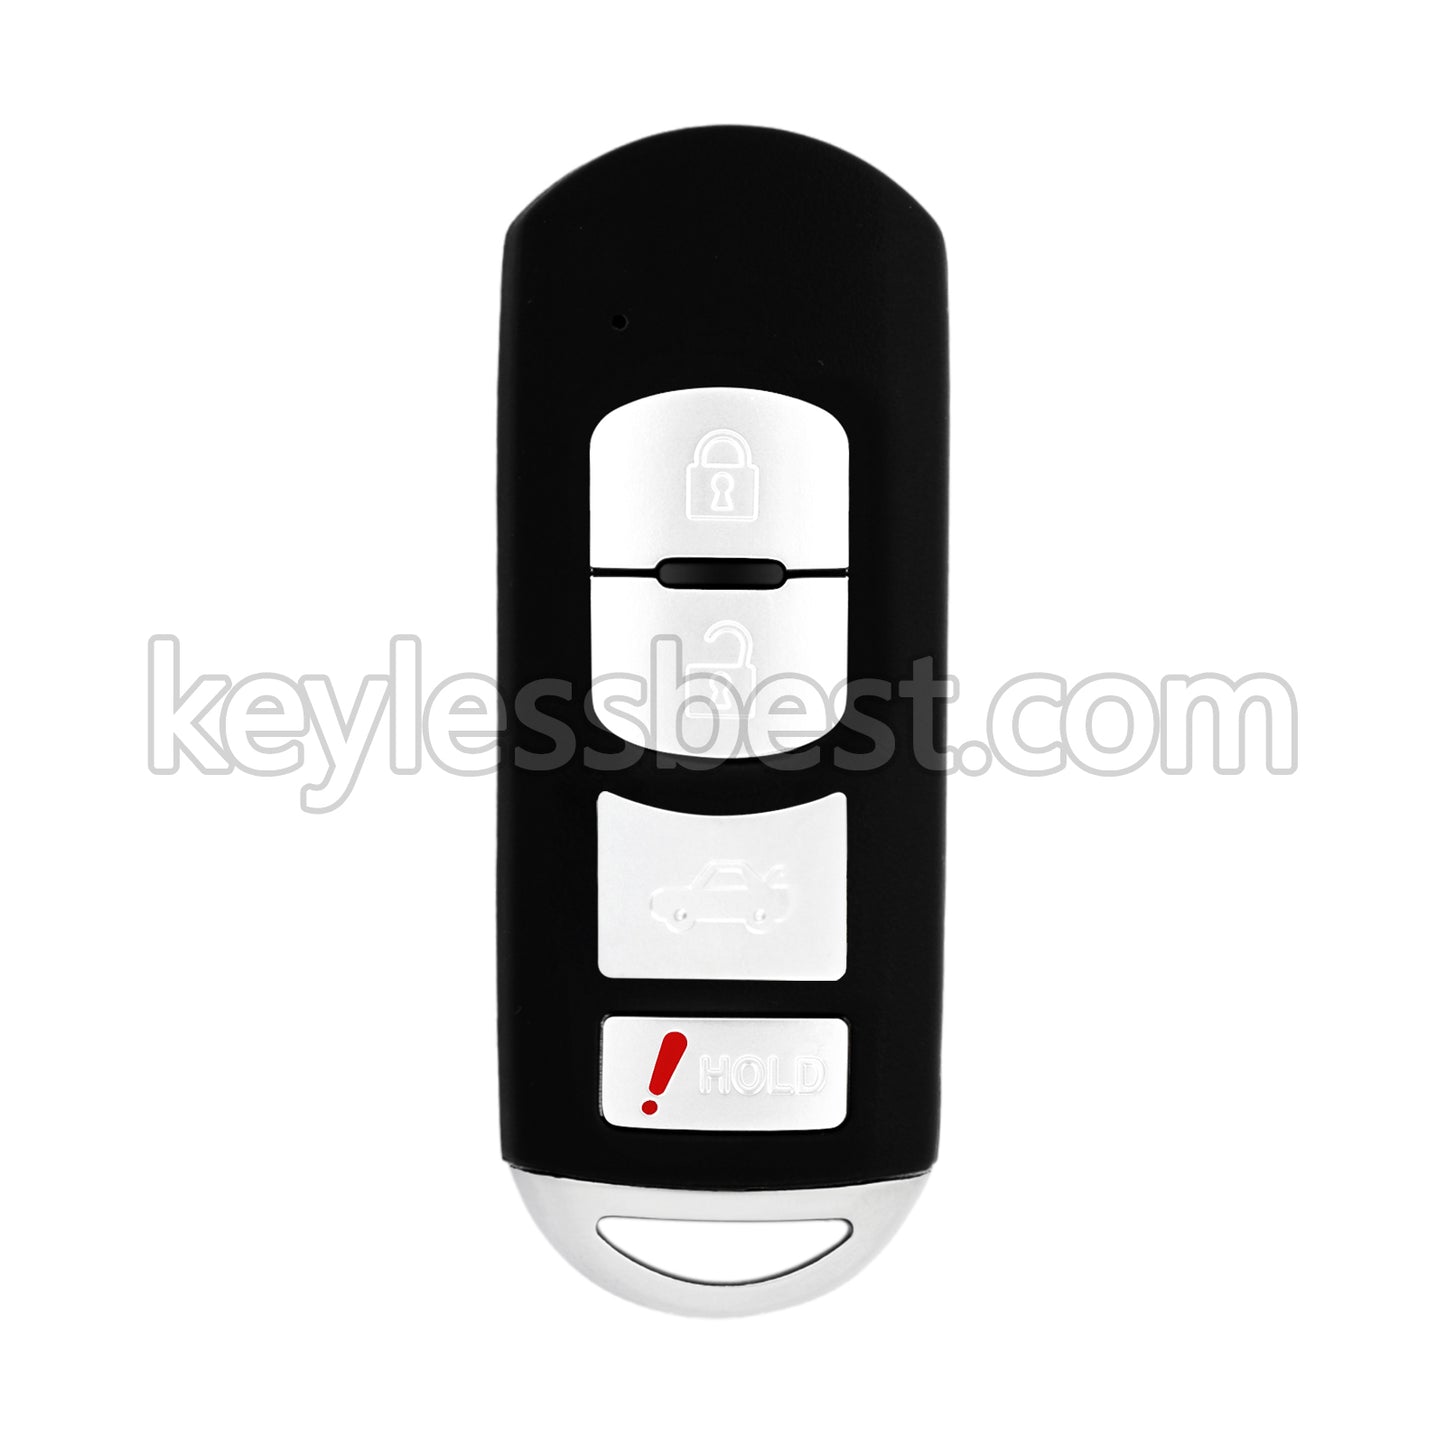 2010 - 2015 Mazda CX-7 CX-9 with Hatch Function / 4 Buttons Remote Key / WAZX1T763SKE11A04 / 315MHz